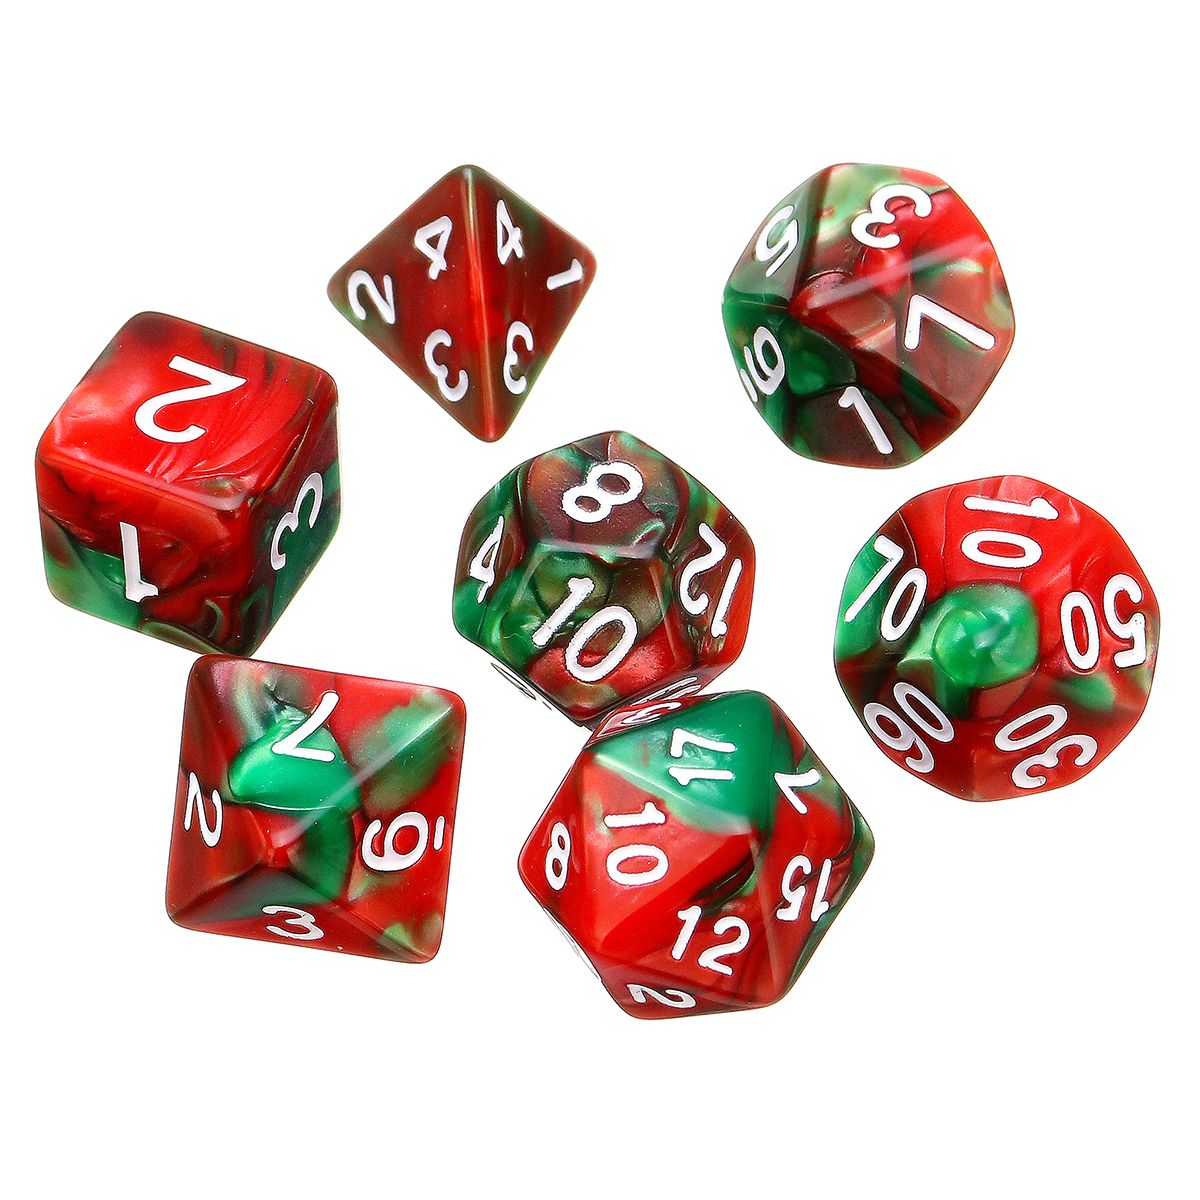 7-Pcs-Polyhedral-Dices-With-Dice-Cup-Role-Playing-Game-Dices-Set-RPG-MTG-Desk-Game-Multisided-Dices-1407058